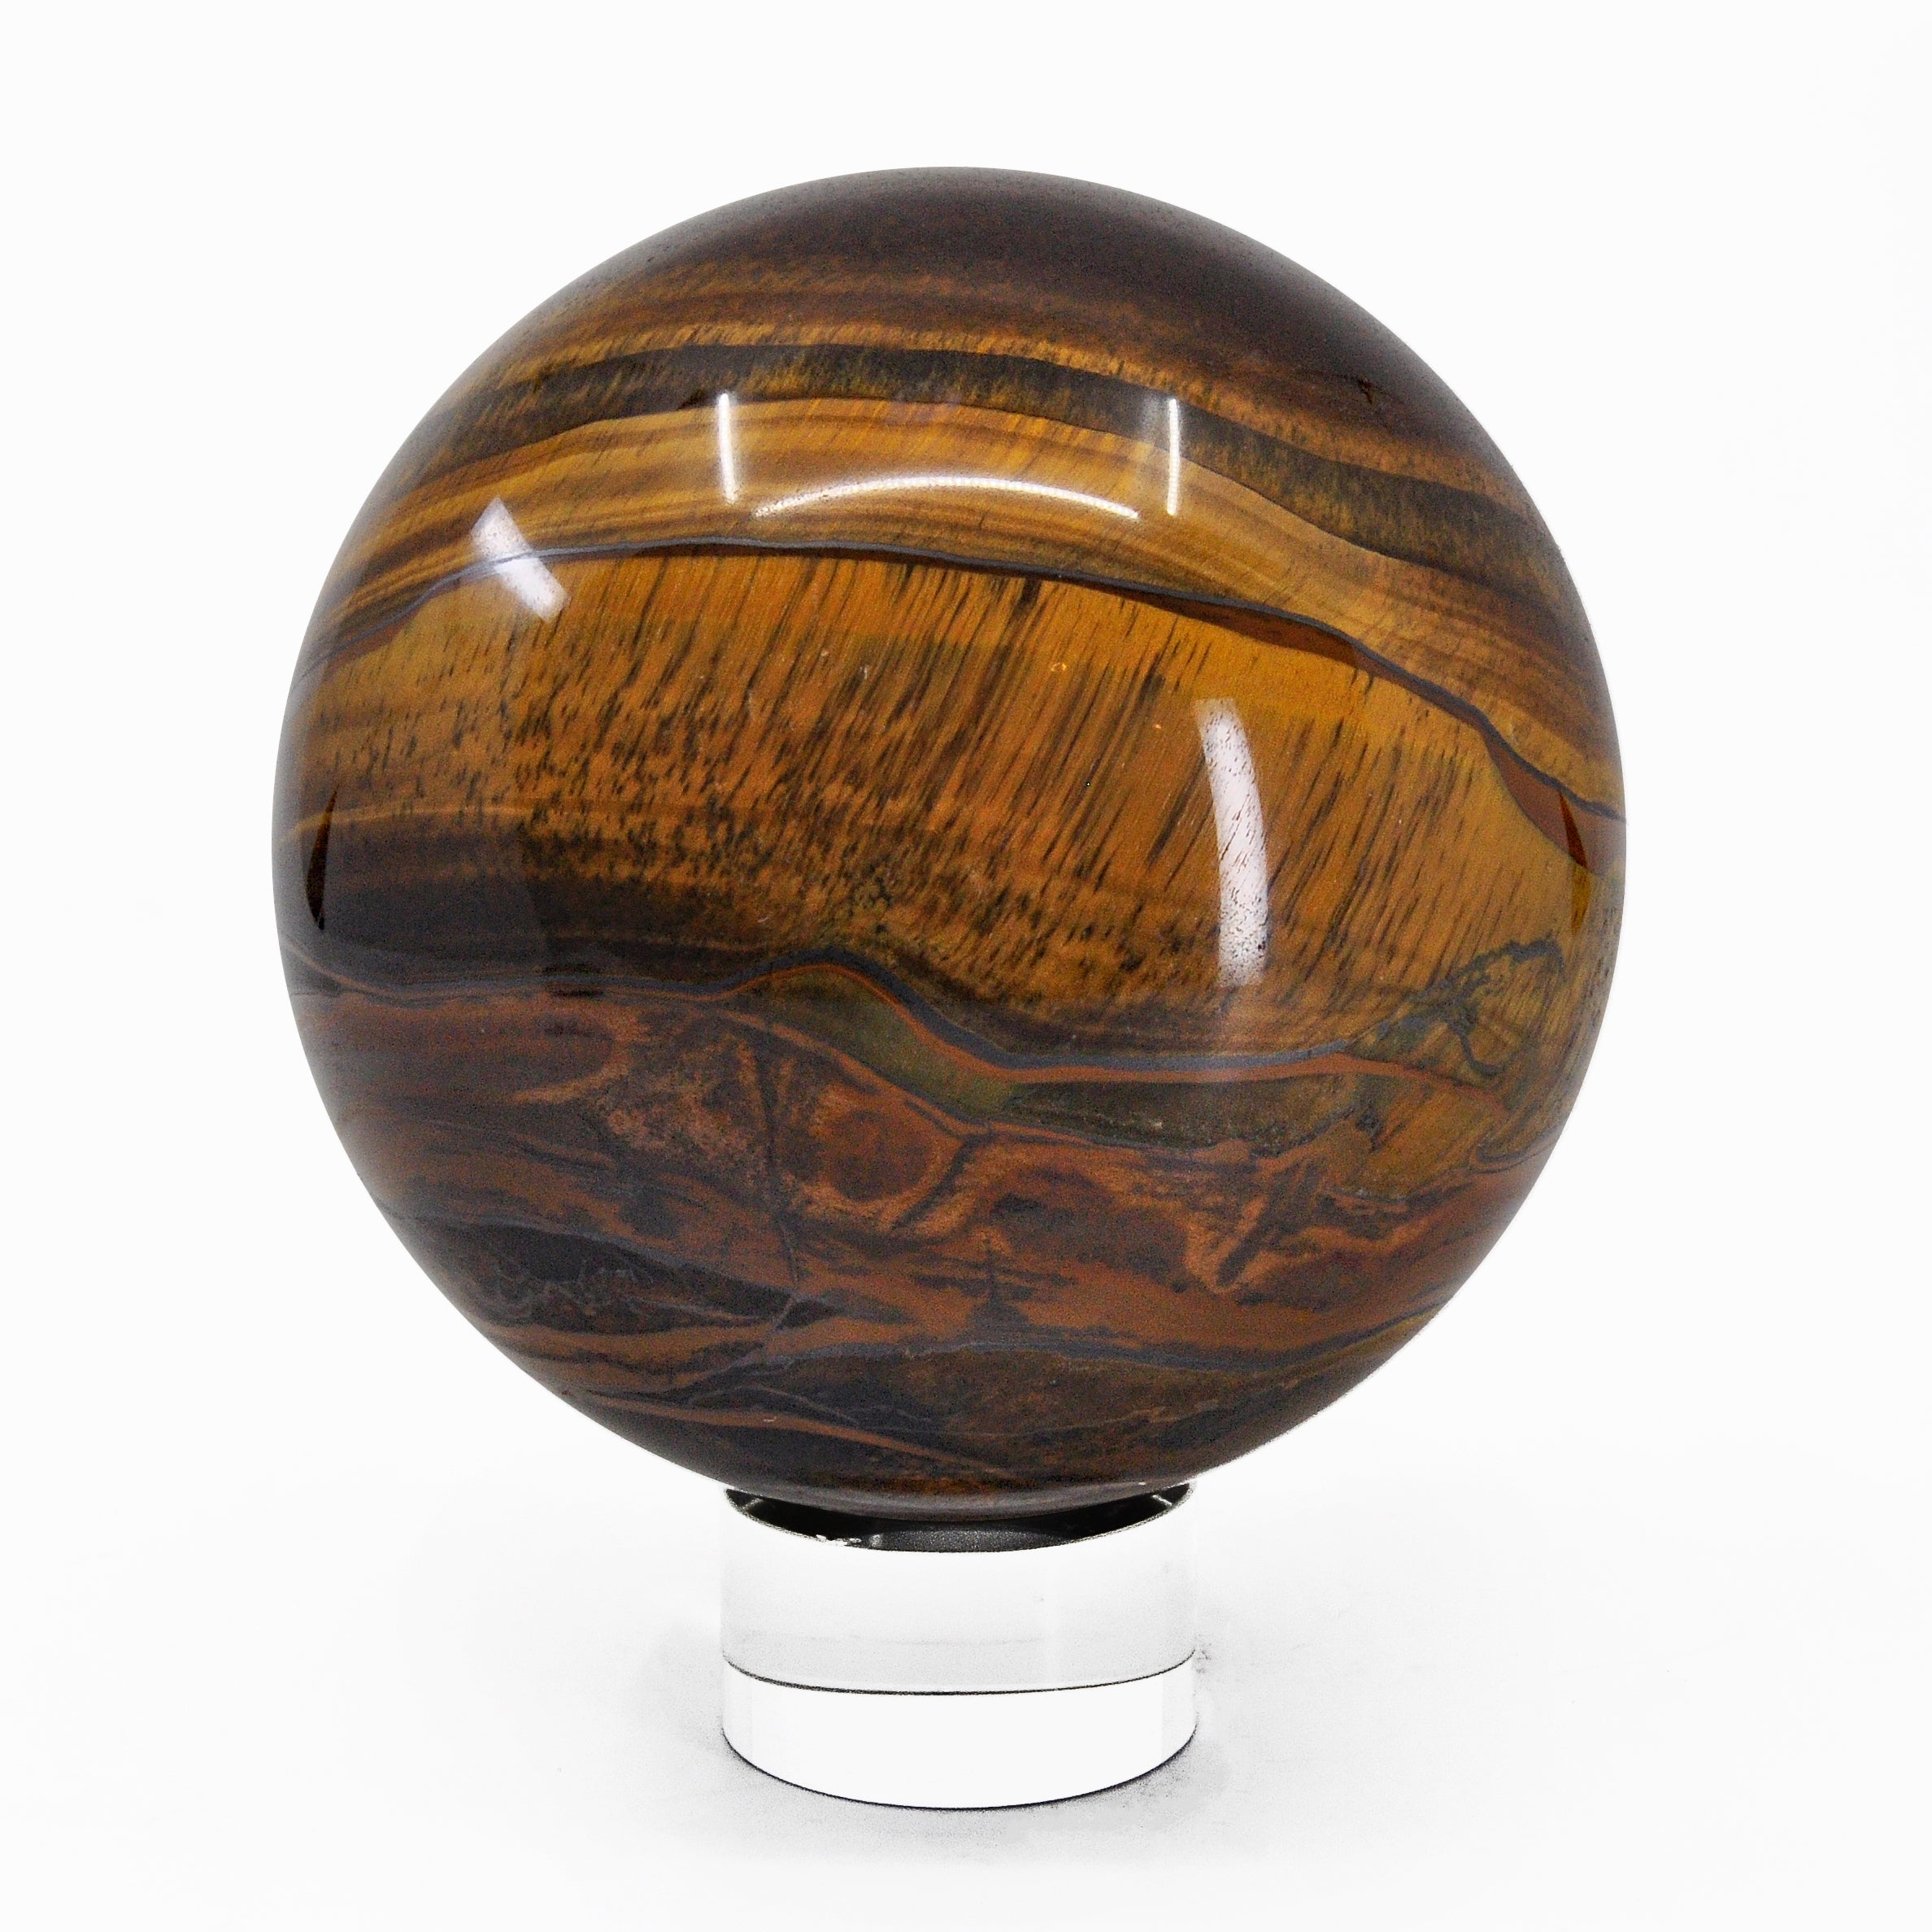 Tiger's Eye with Hematite 3.99 inch 3.62 lb Polished Crystal Sphere - South Africa - CCL-293 - Crystalarium